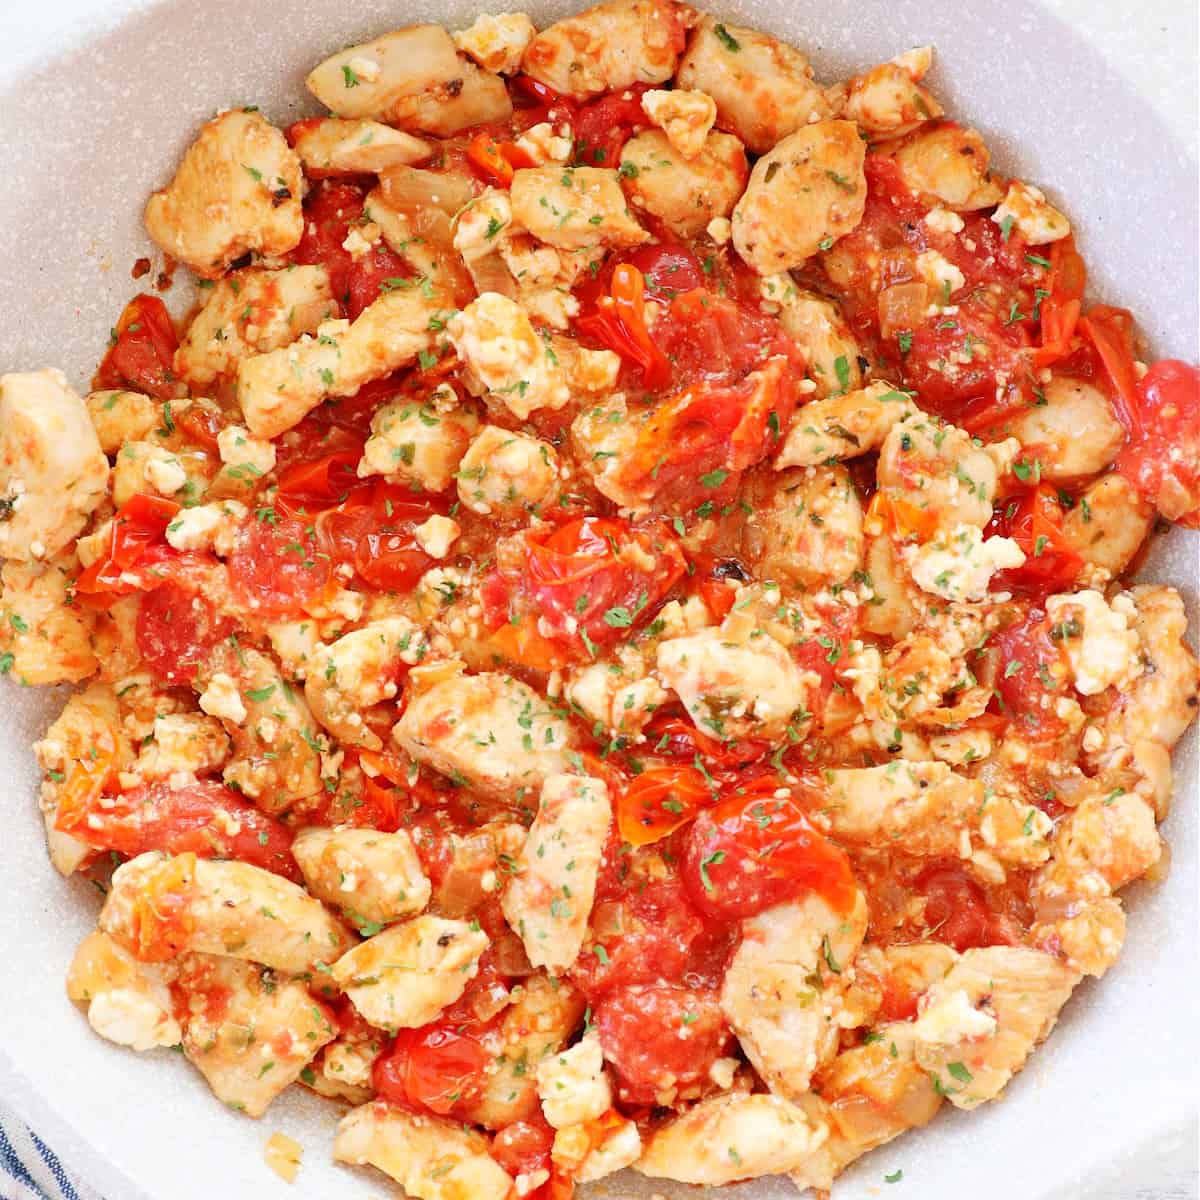 Chicken with tomatoes and feta in a skillet.